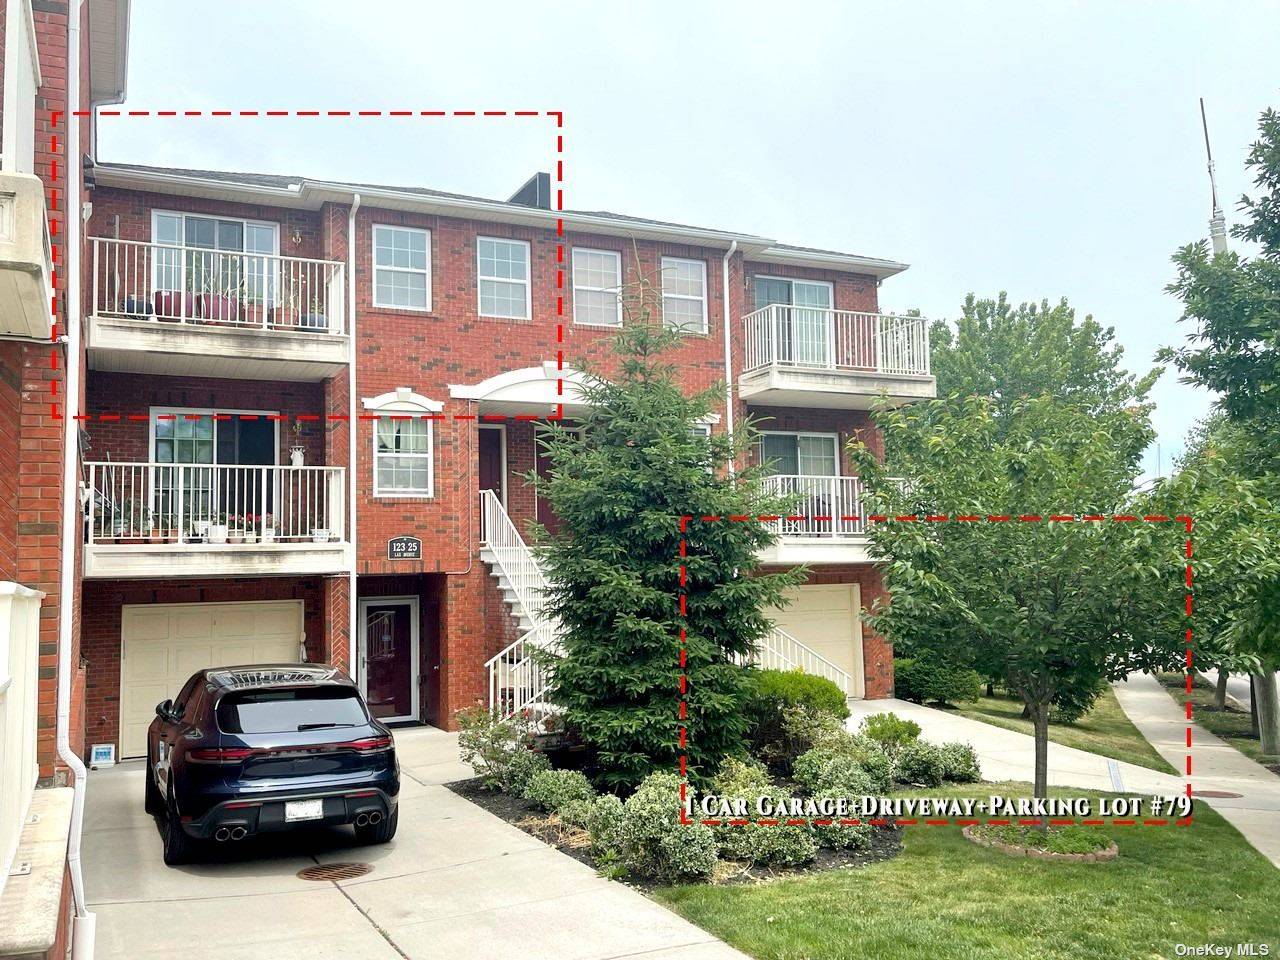 11 year young Prestigious Powell Cove Estates charming condo unit, 1278 Sqft, 3BRS, 2BAS and 2 balconies unit on the top floor Unit comes with an assigned parking space 79, ...